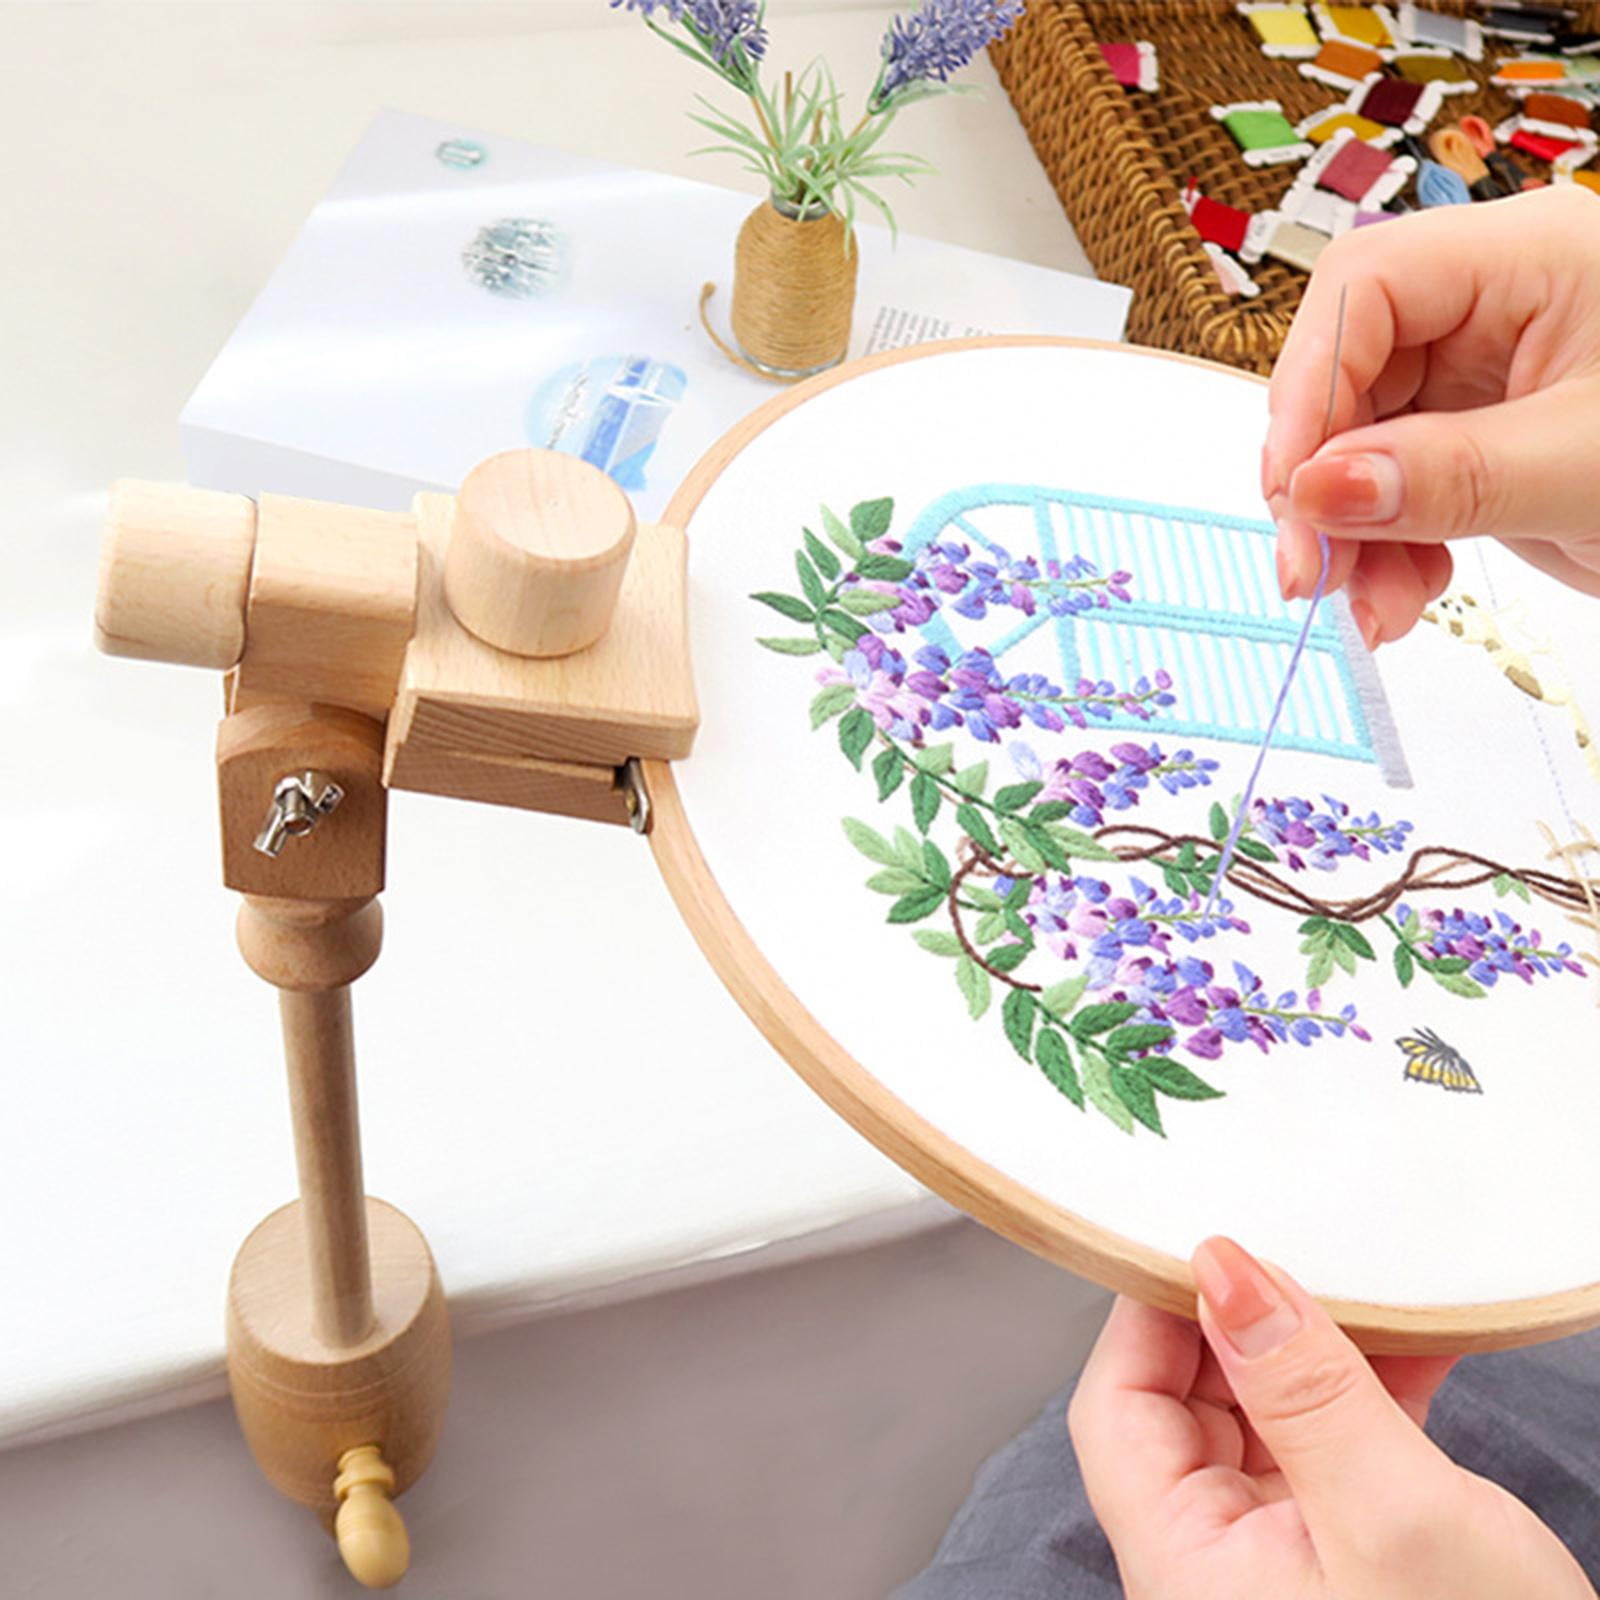 Adjustable Embroidery Hoop Holder with Clamp, Wooden Stitch Stand, Rotated  Embroidery Hoop Holder Stand for Embroidery, Needlepoint Craft 